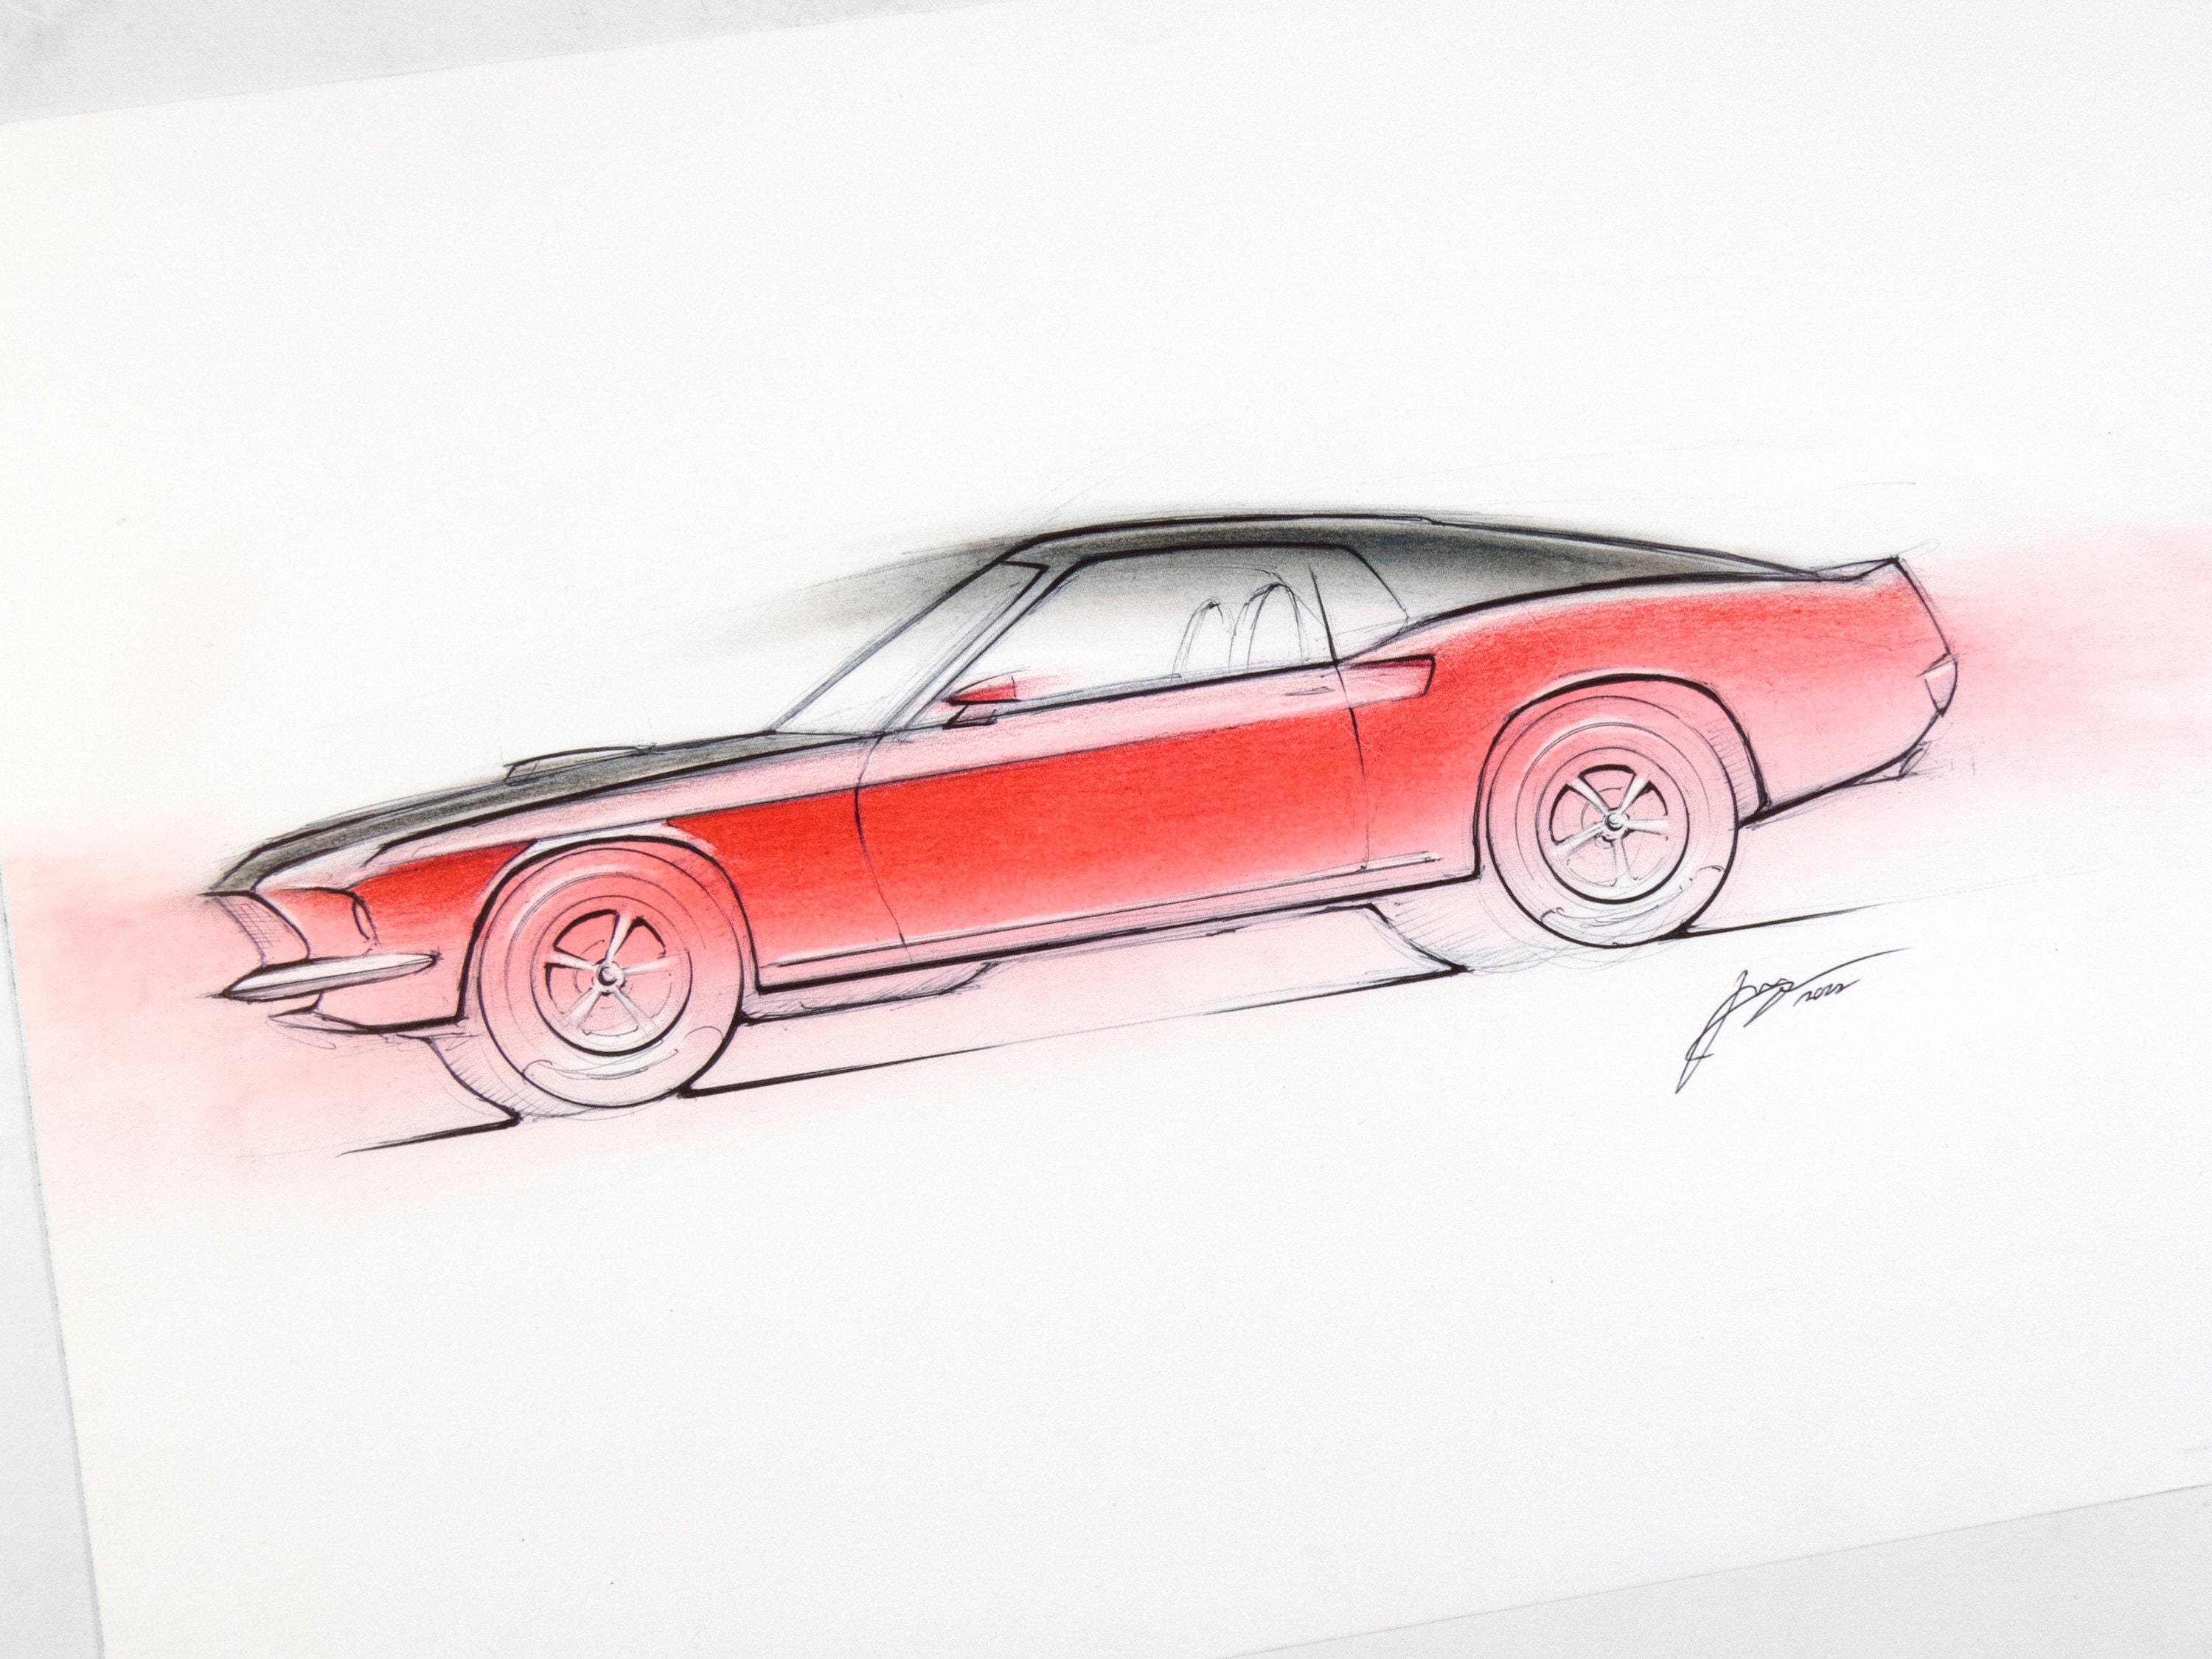 FORD MUSTANG SKETCH - DETROIT AUTO ART